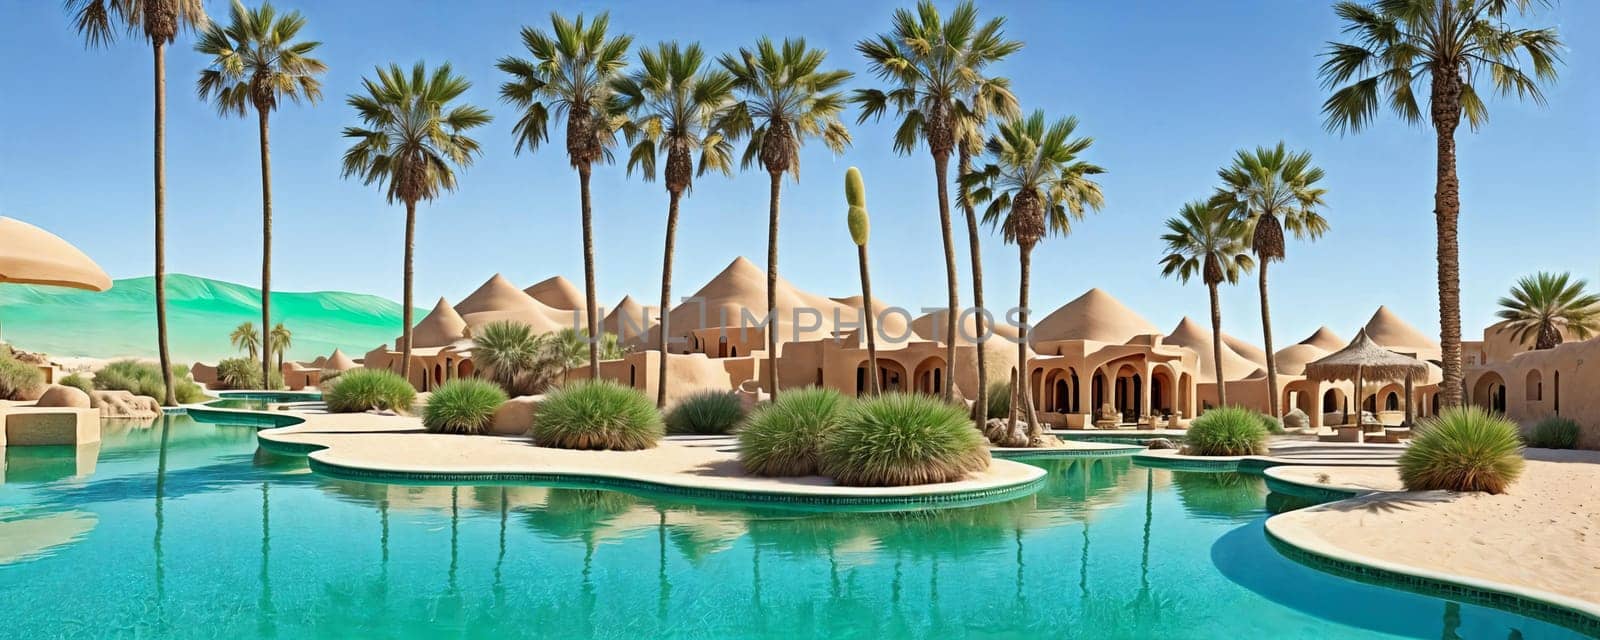 A hidden oasis in the desert with emerald-green waters, palm trees, and magical sand dunes that shift shape. AI Generated